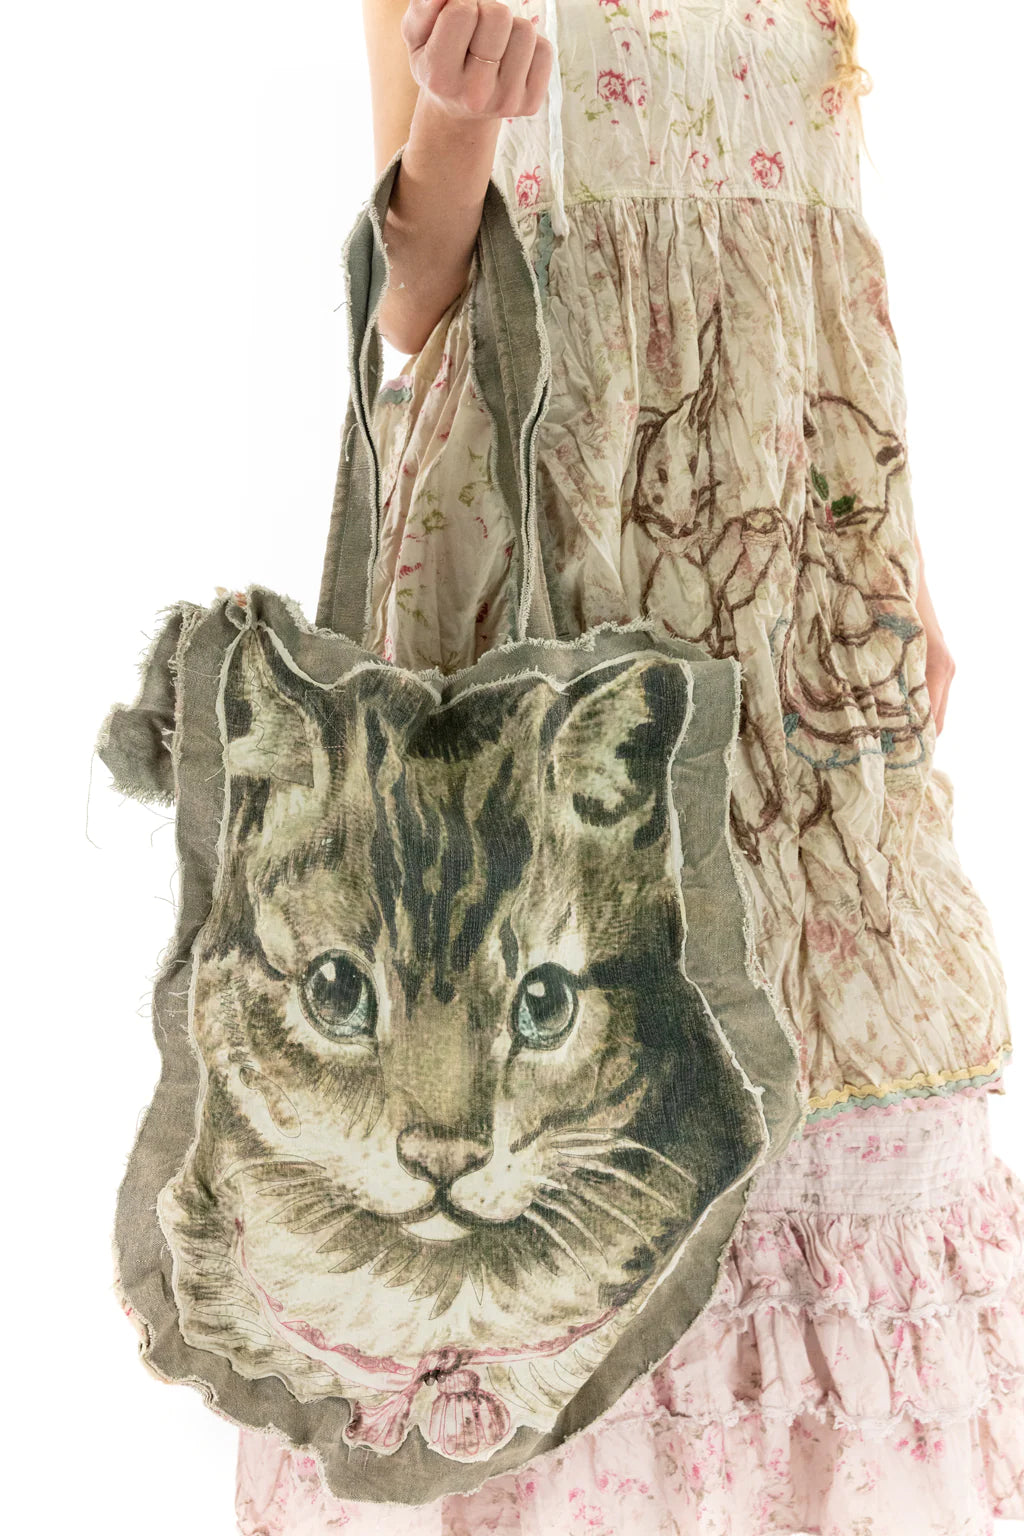 Goosey Army Canvas Bag by Magnolia Pearl